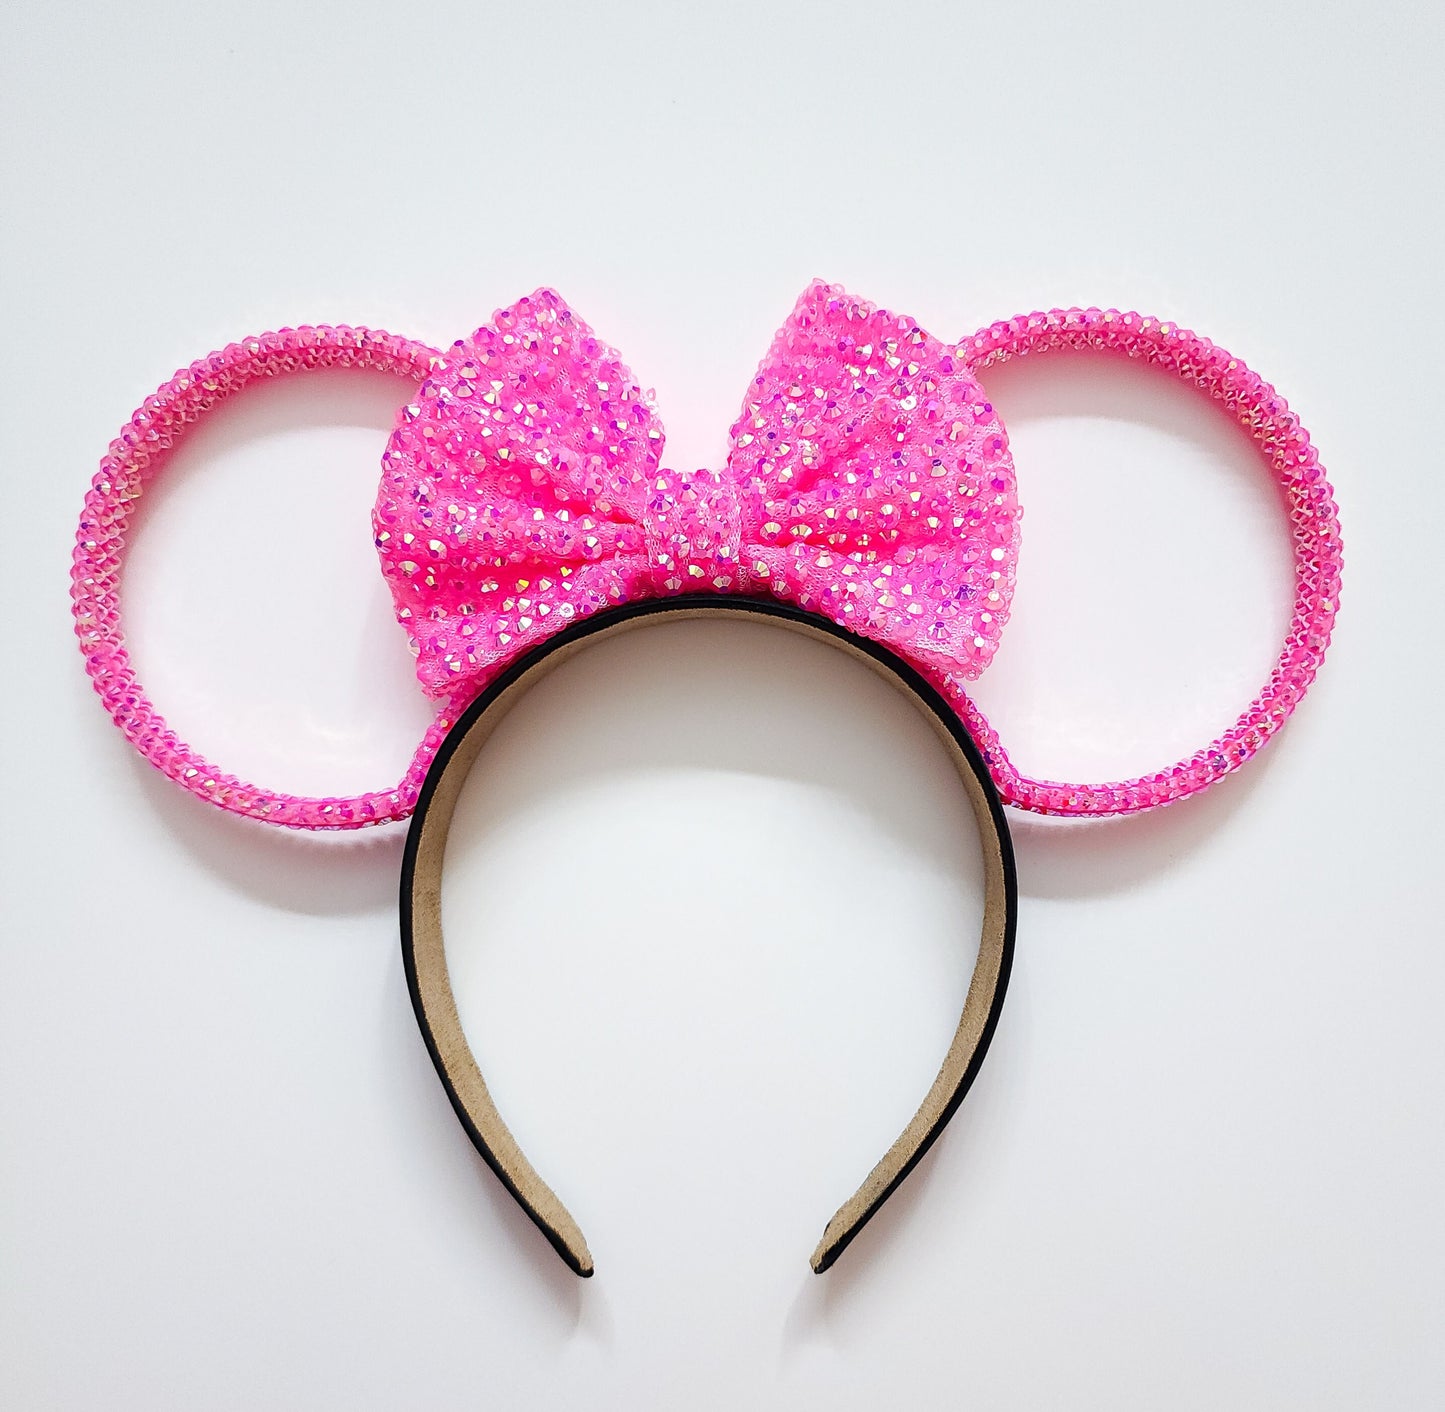 Magic Mountain ears ORIGINAL design- hot pink jelly/resin Rhinestone rings WITH hot pink jelly rhinestone bow 3D Mouse Ears